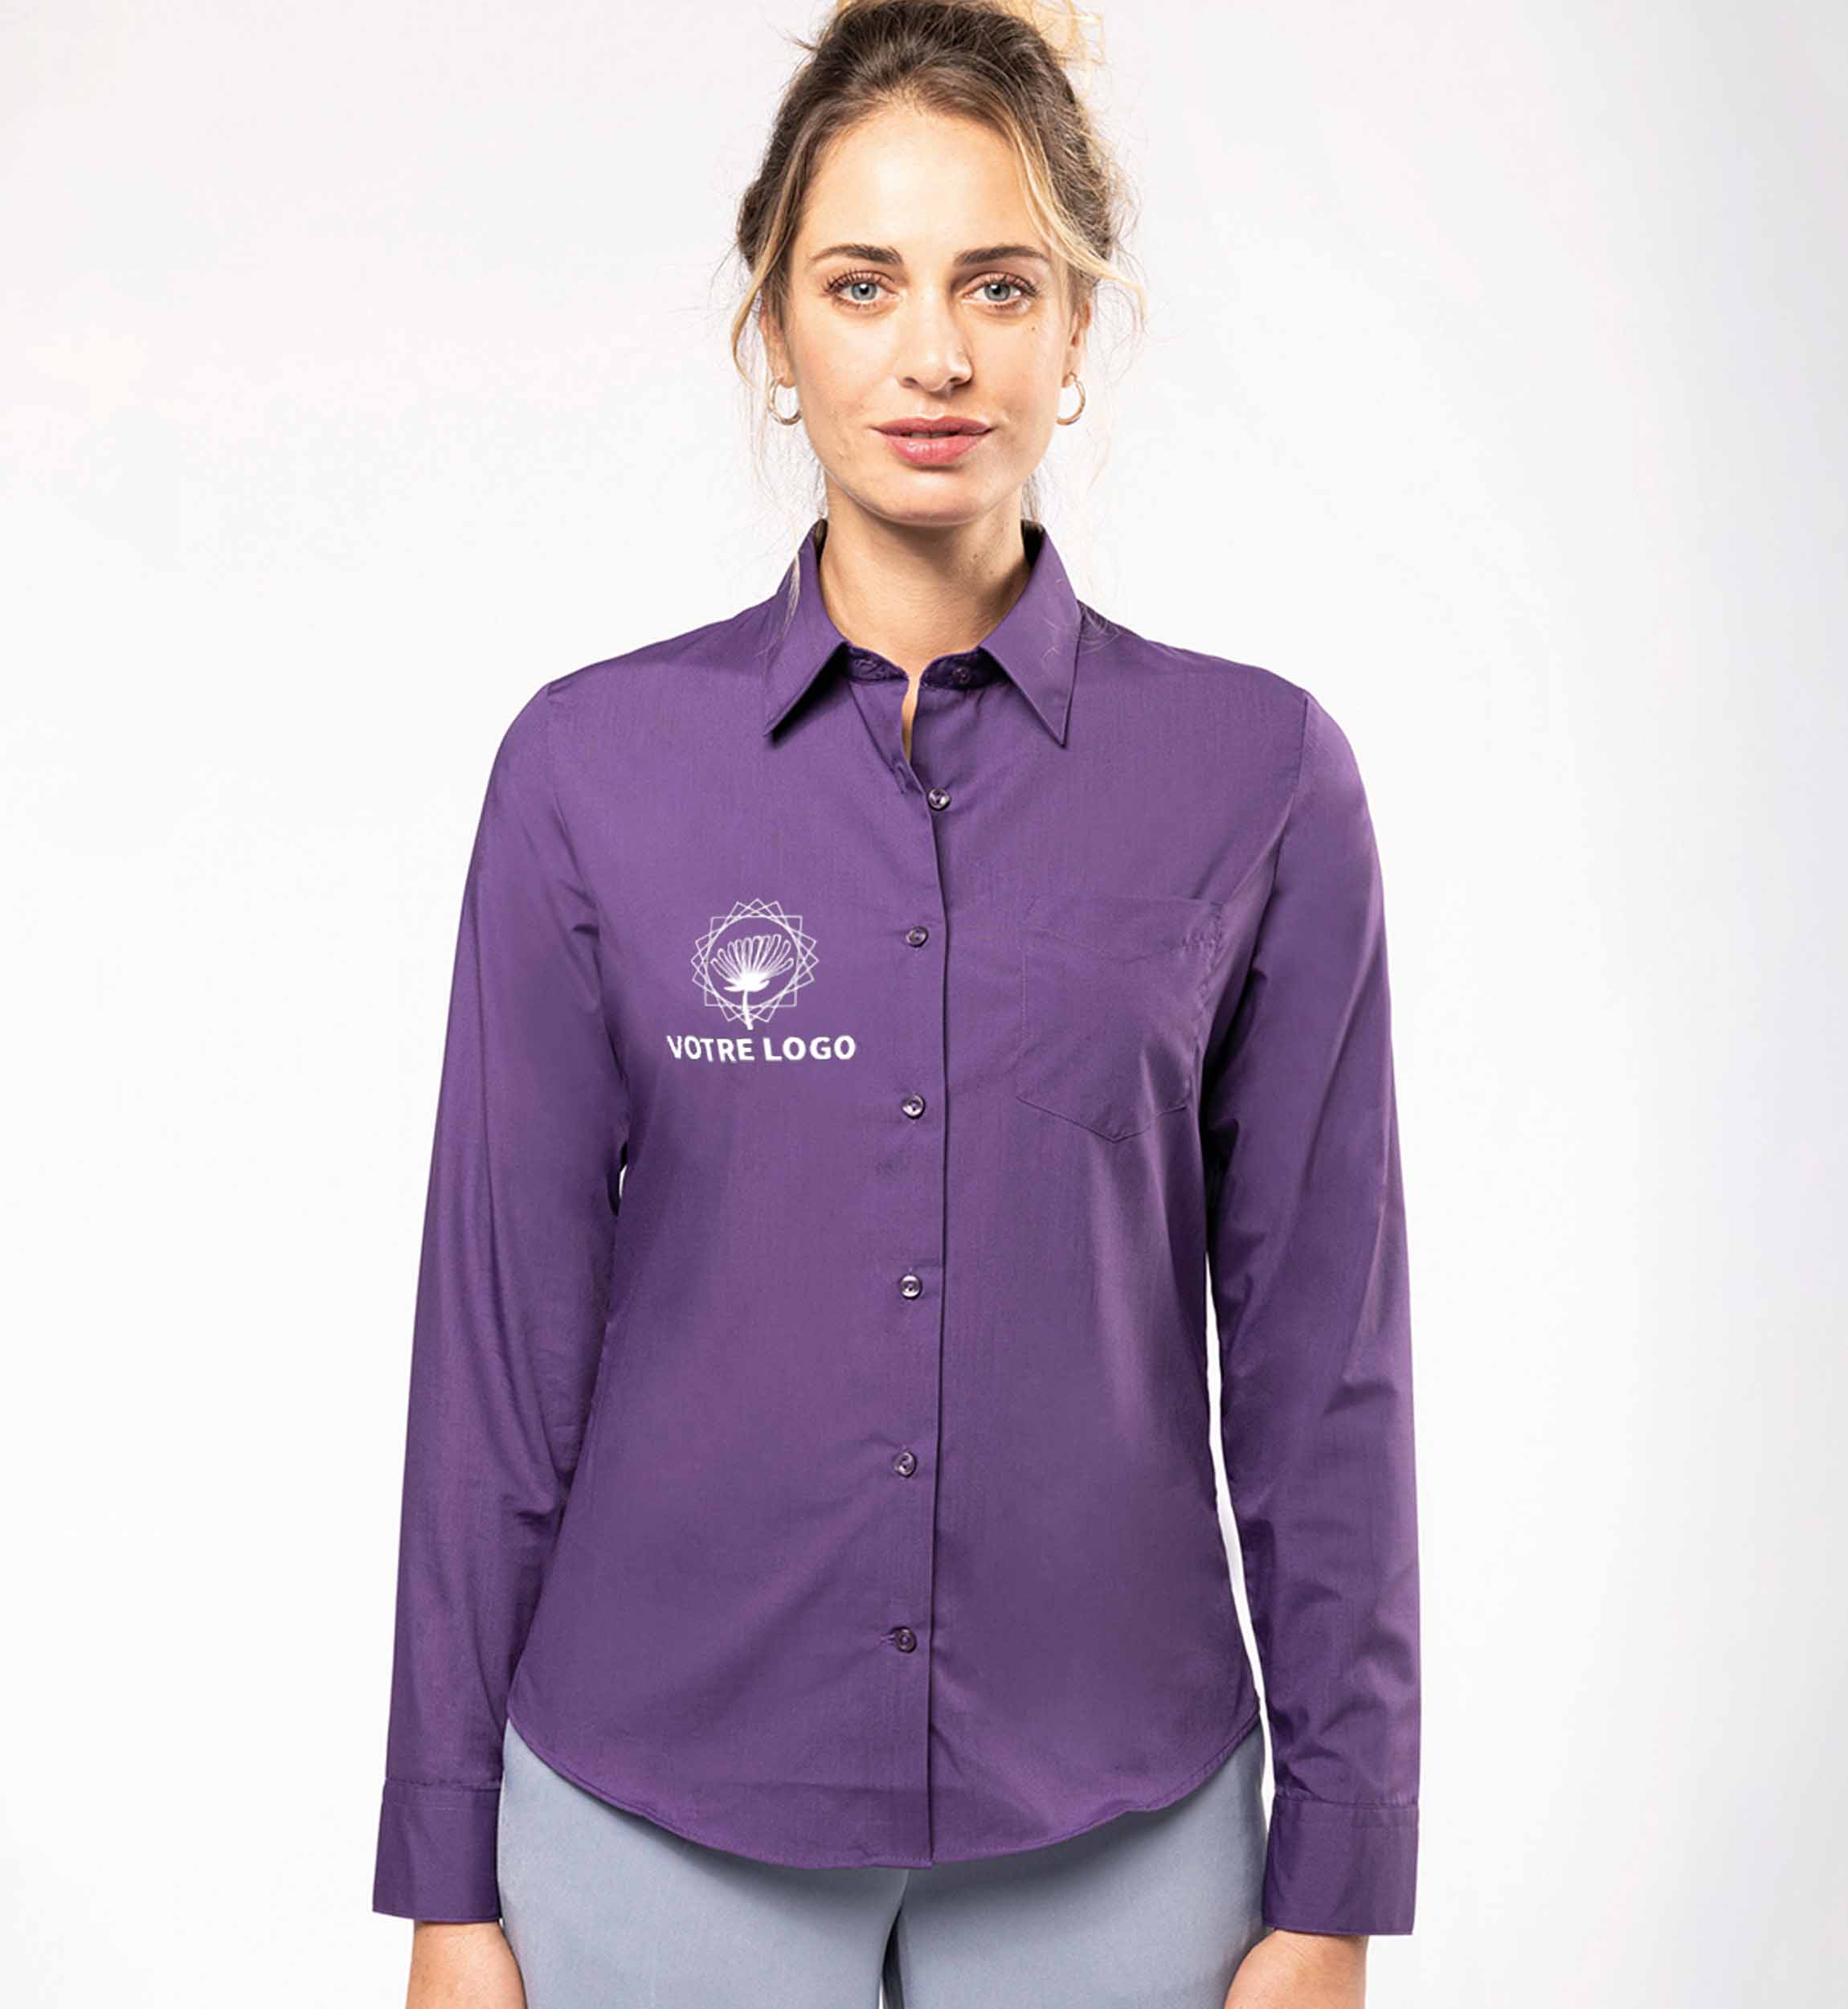 Discover Our Customizable Long Sleeve Shirt 